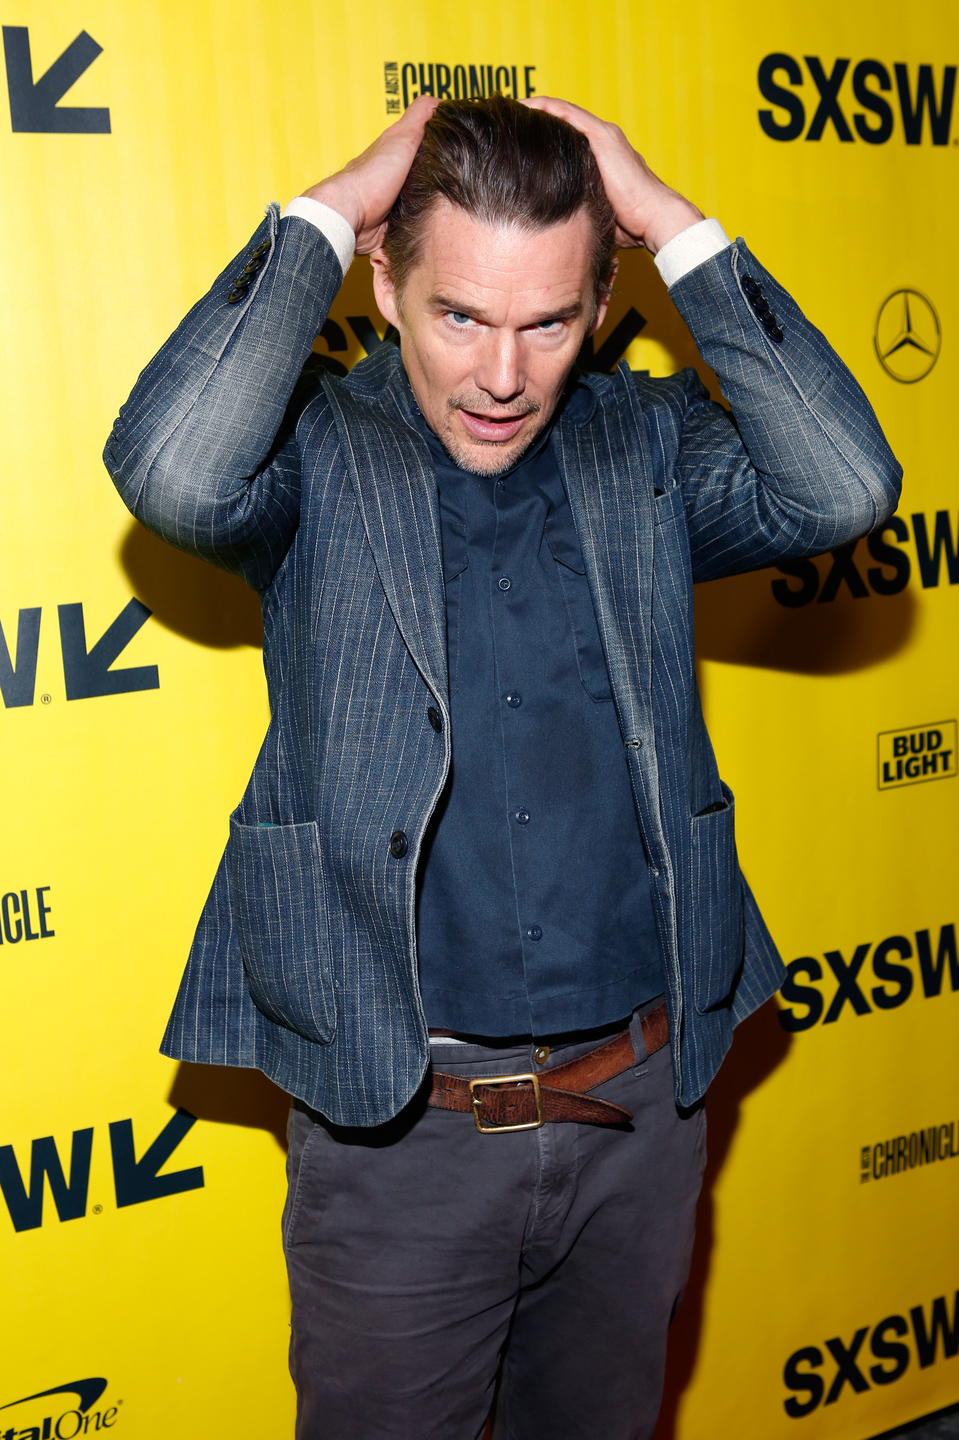 Ethan Hawke at the First Reformed Red Carpet Premiere. Photo by Sean Mathis/Getty Images for SXSW